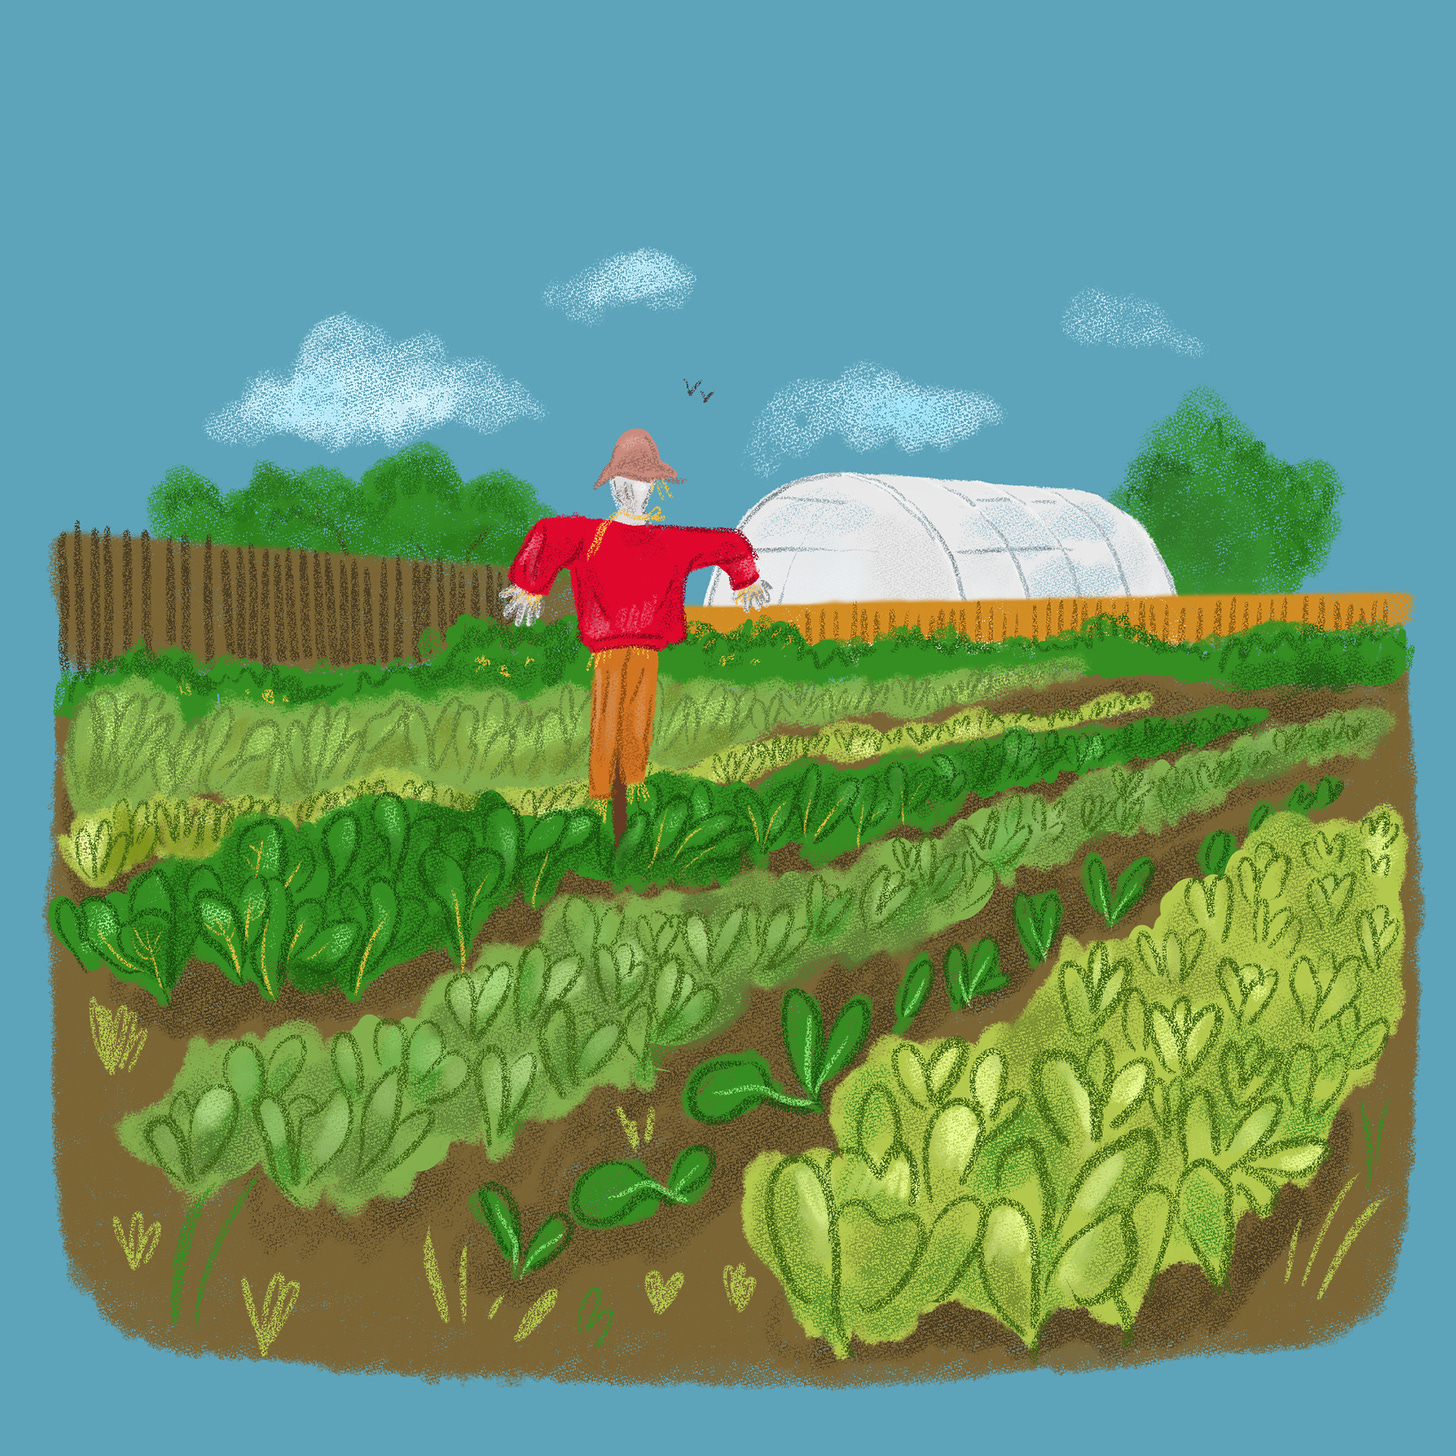 Image of a scarecrow with a red shirt in a field of narrow beds filled with lush green vegetables. A polytunnel is in the distance. The sky is vivid blue with a few fluffy clouds.